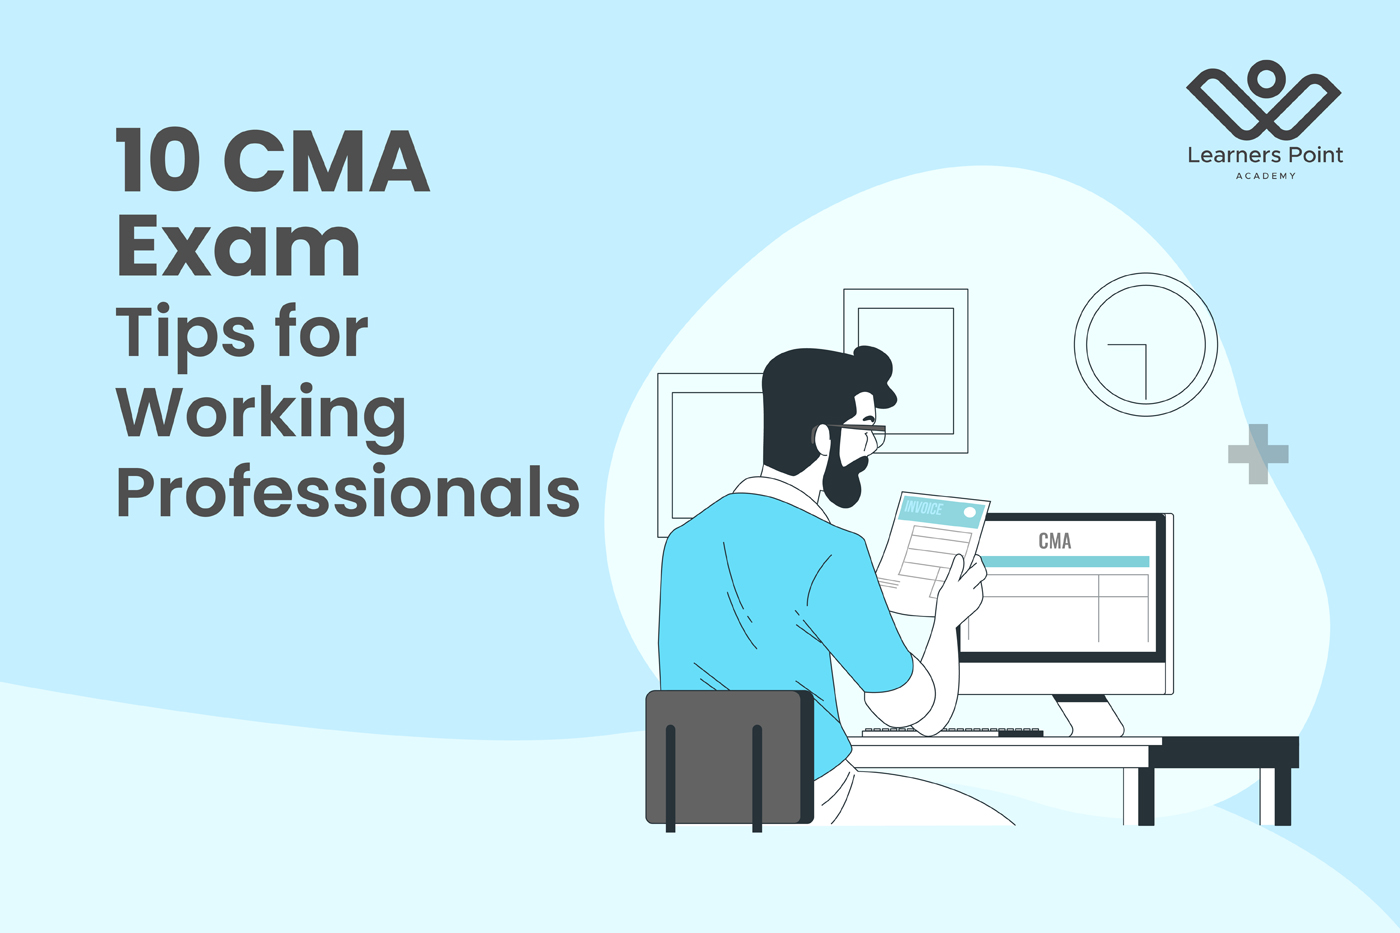 10 CMA Exam Tips for Working Professionals